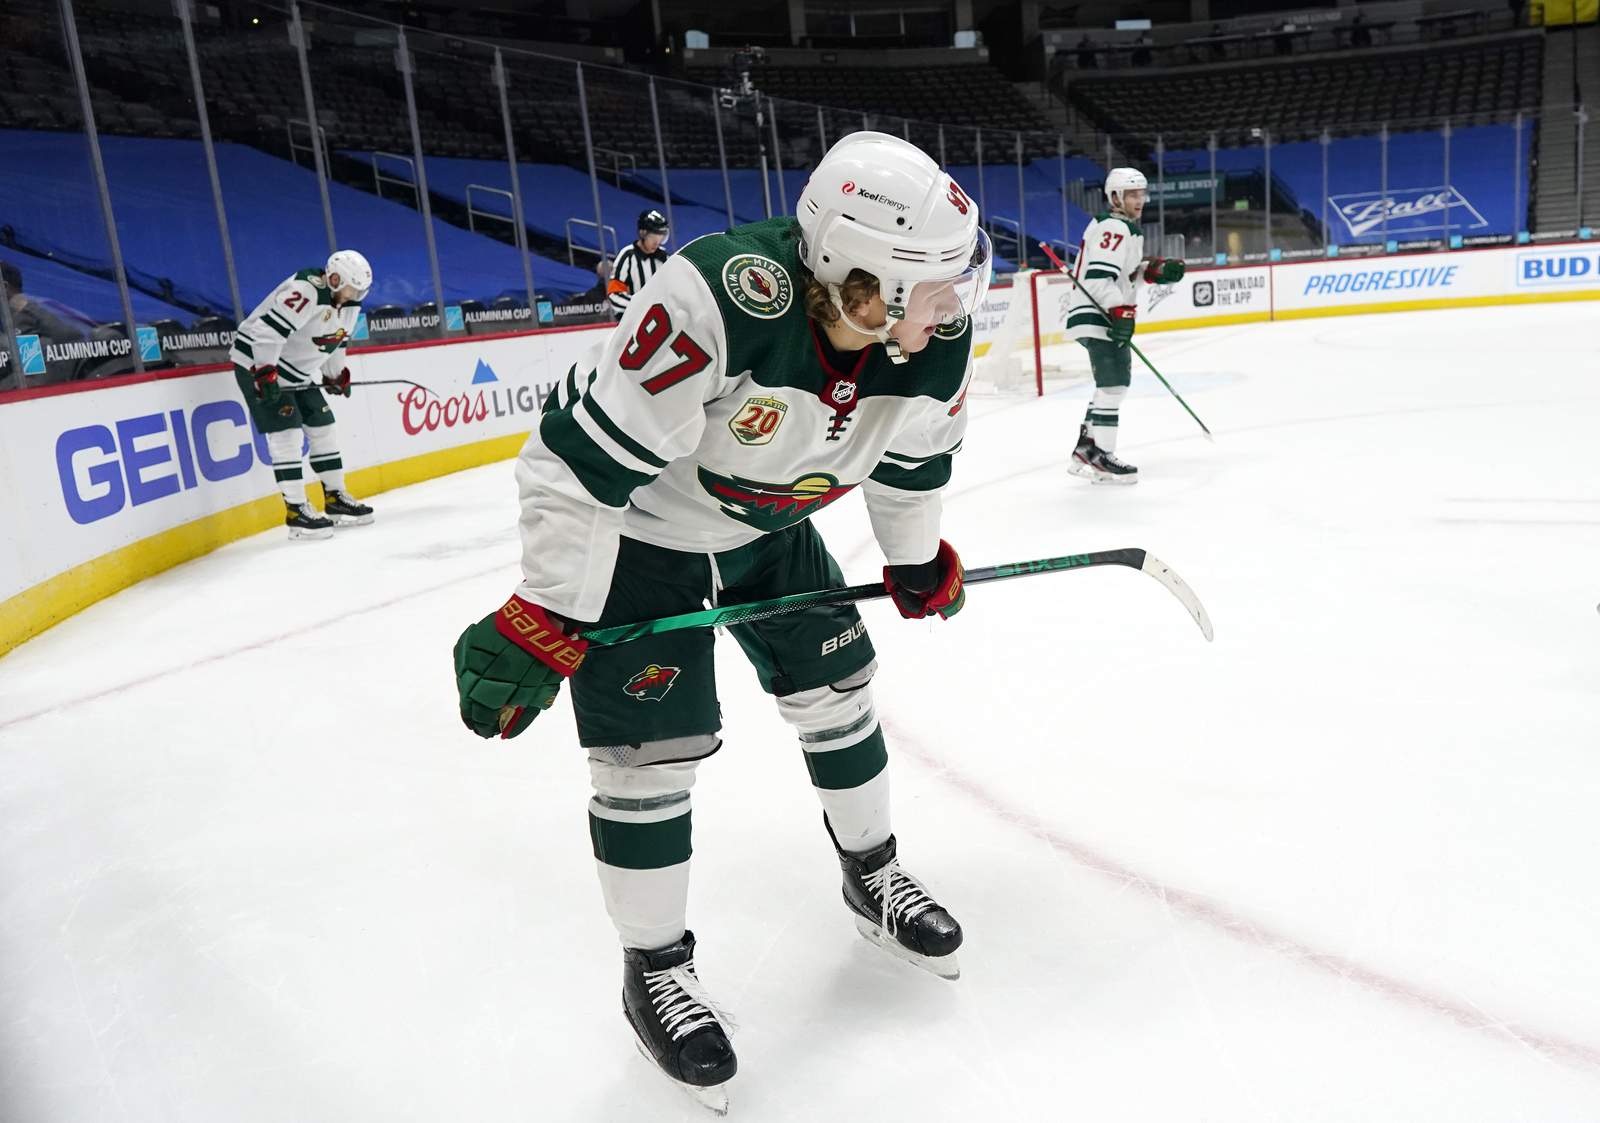 The Latest: Minnesota Wild returning after 10-day pause